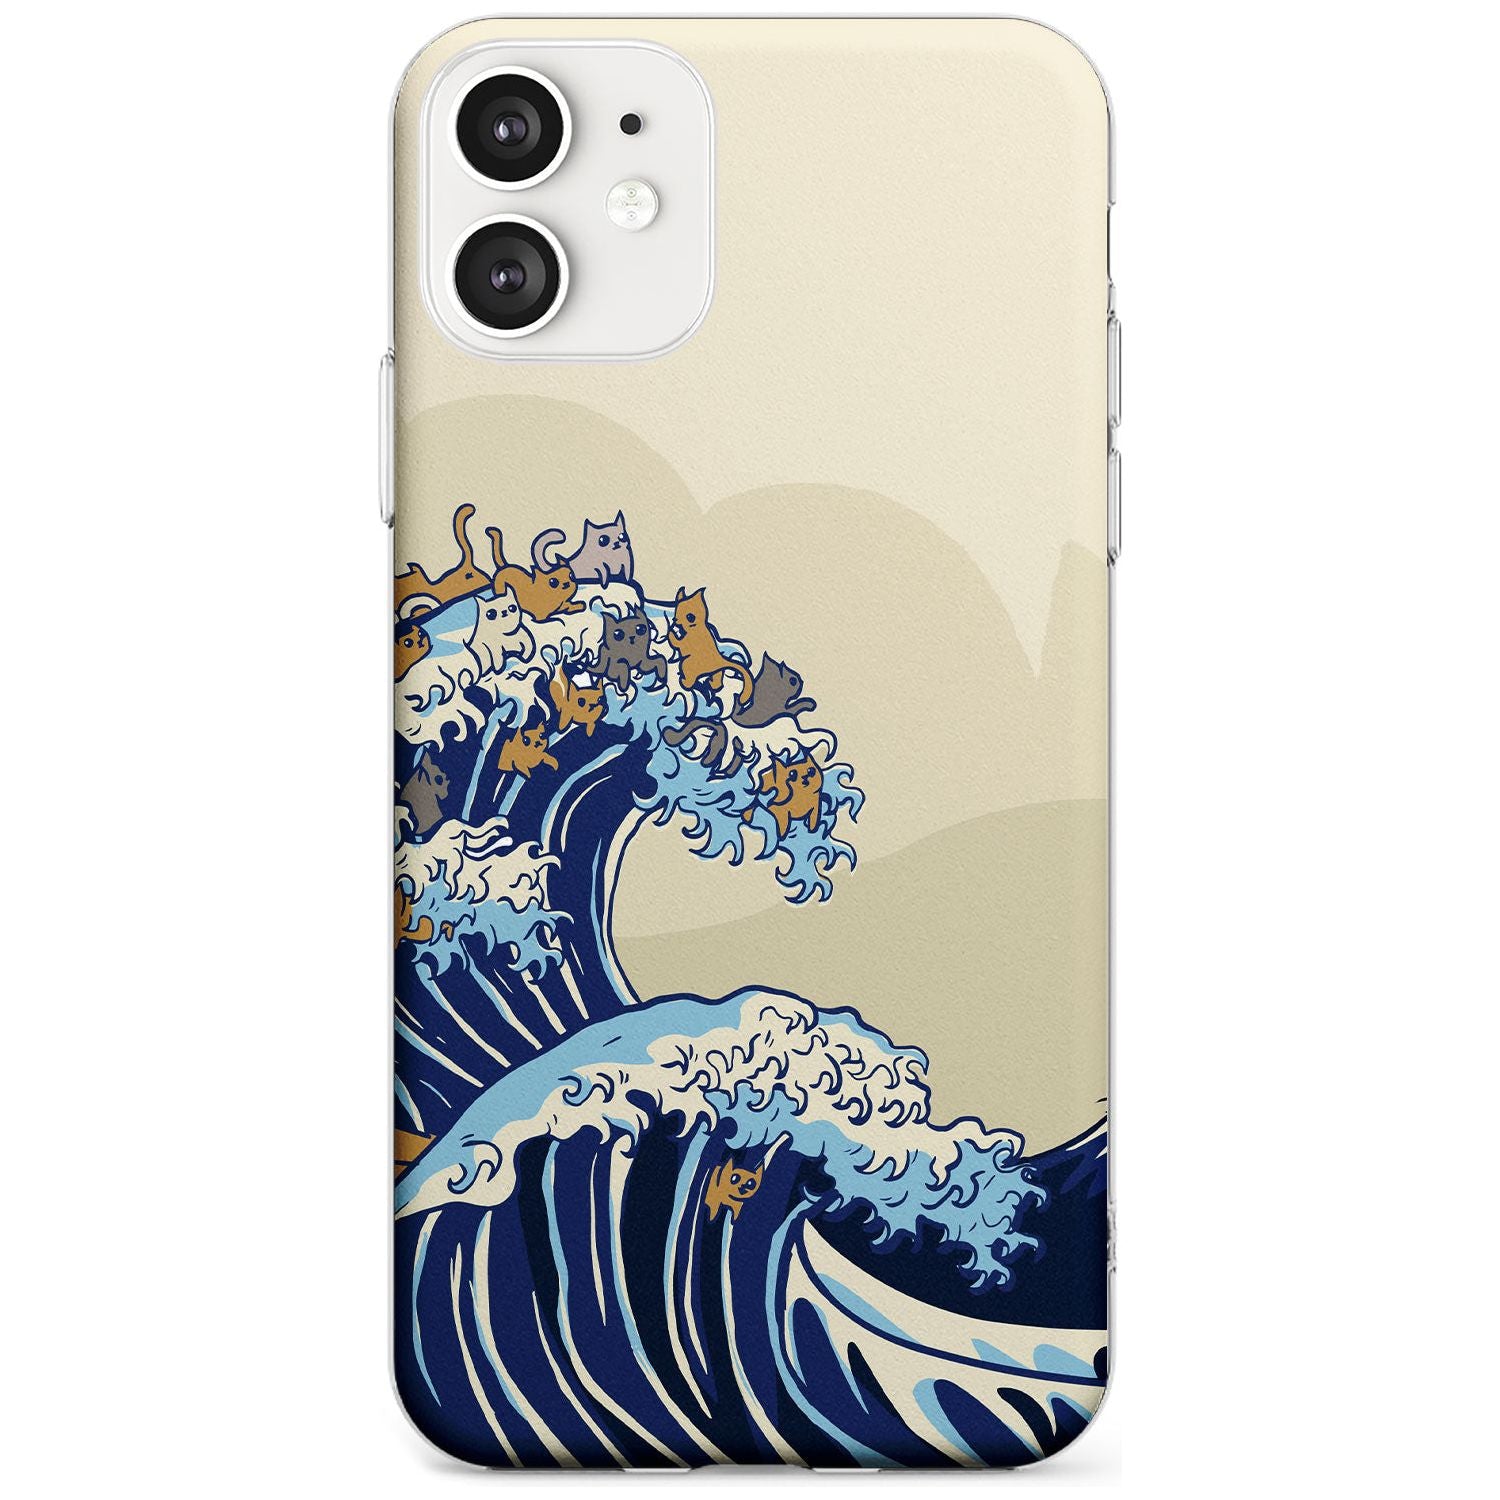 The Great Cat Wave Slim TPU Phone Case for iPhone 11